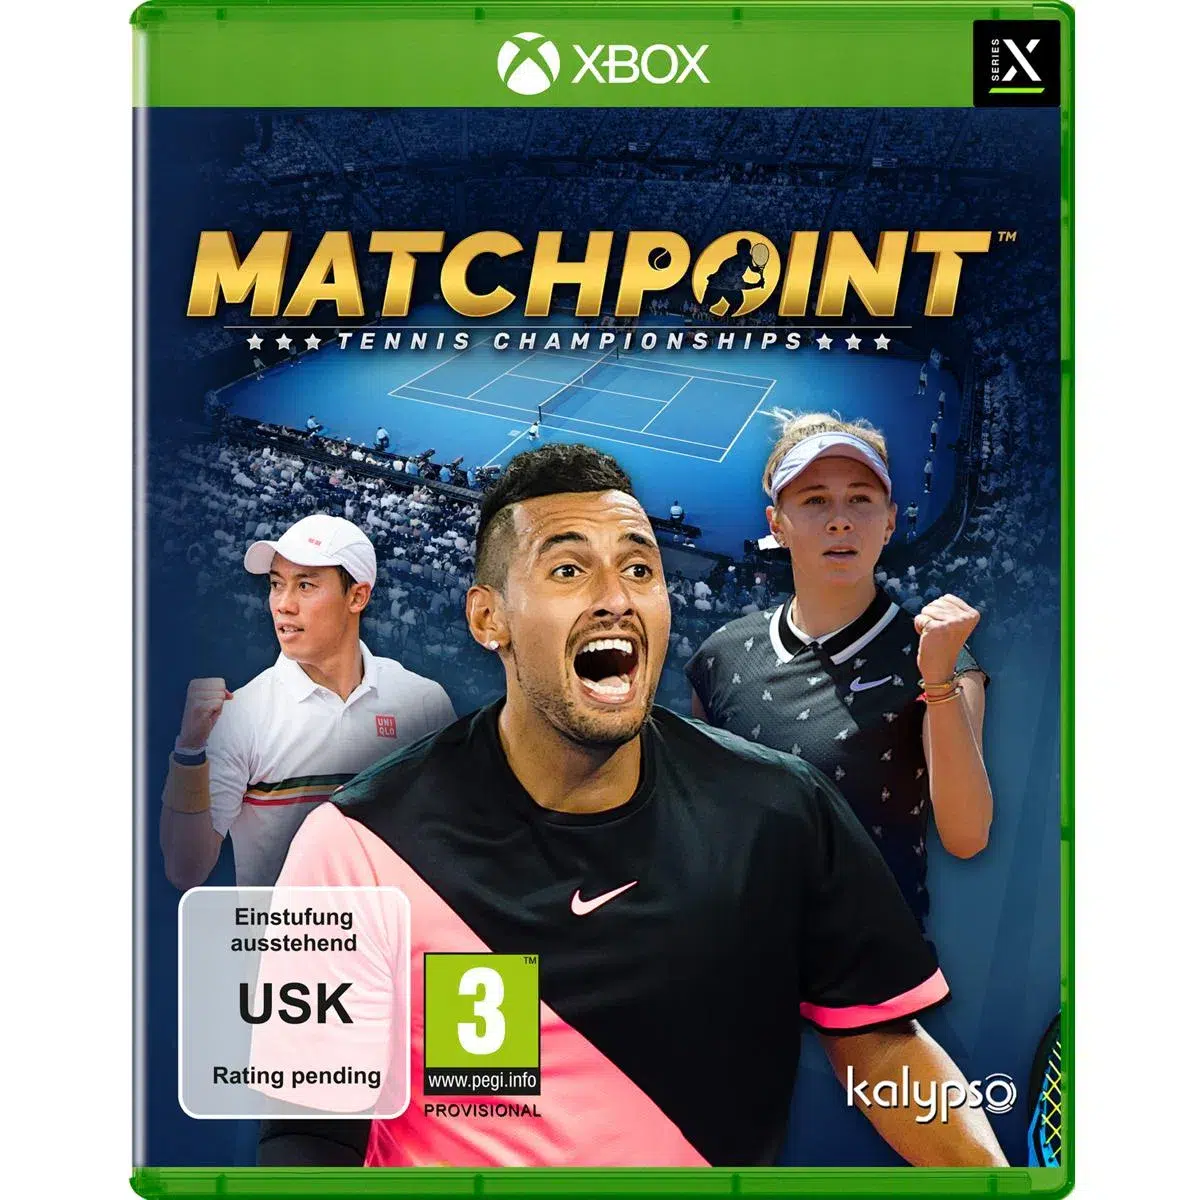 Matchpoint - Tennis Championships Legends Edition (XSRX)